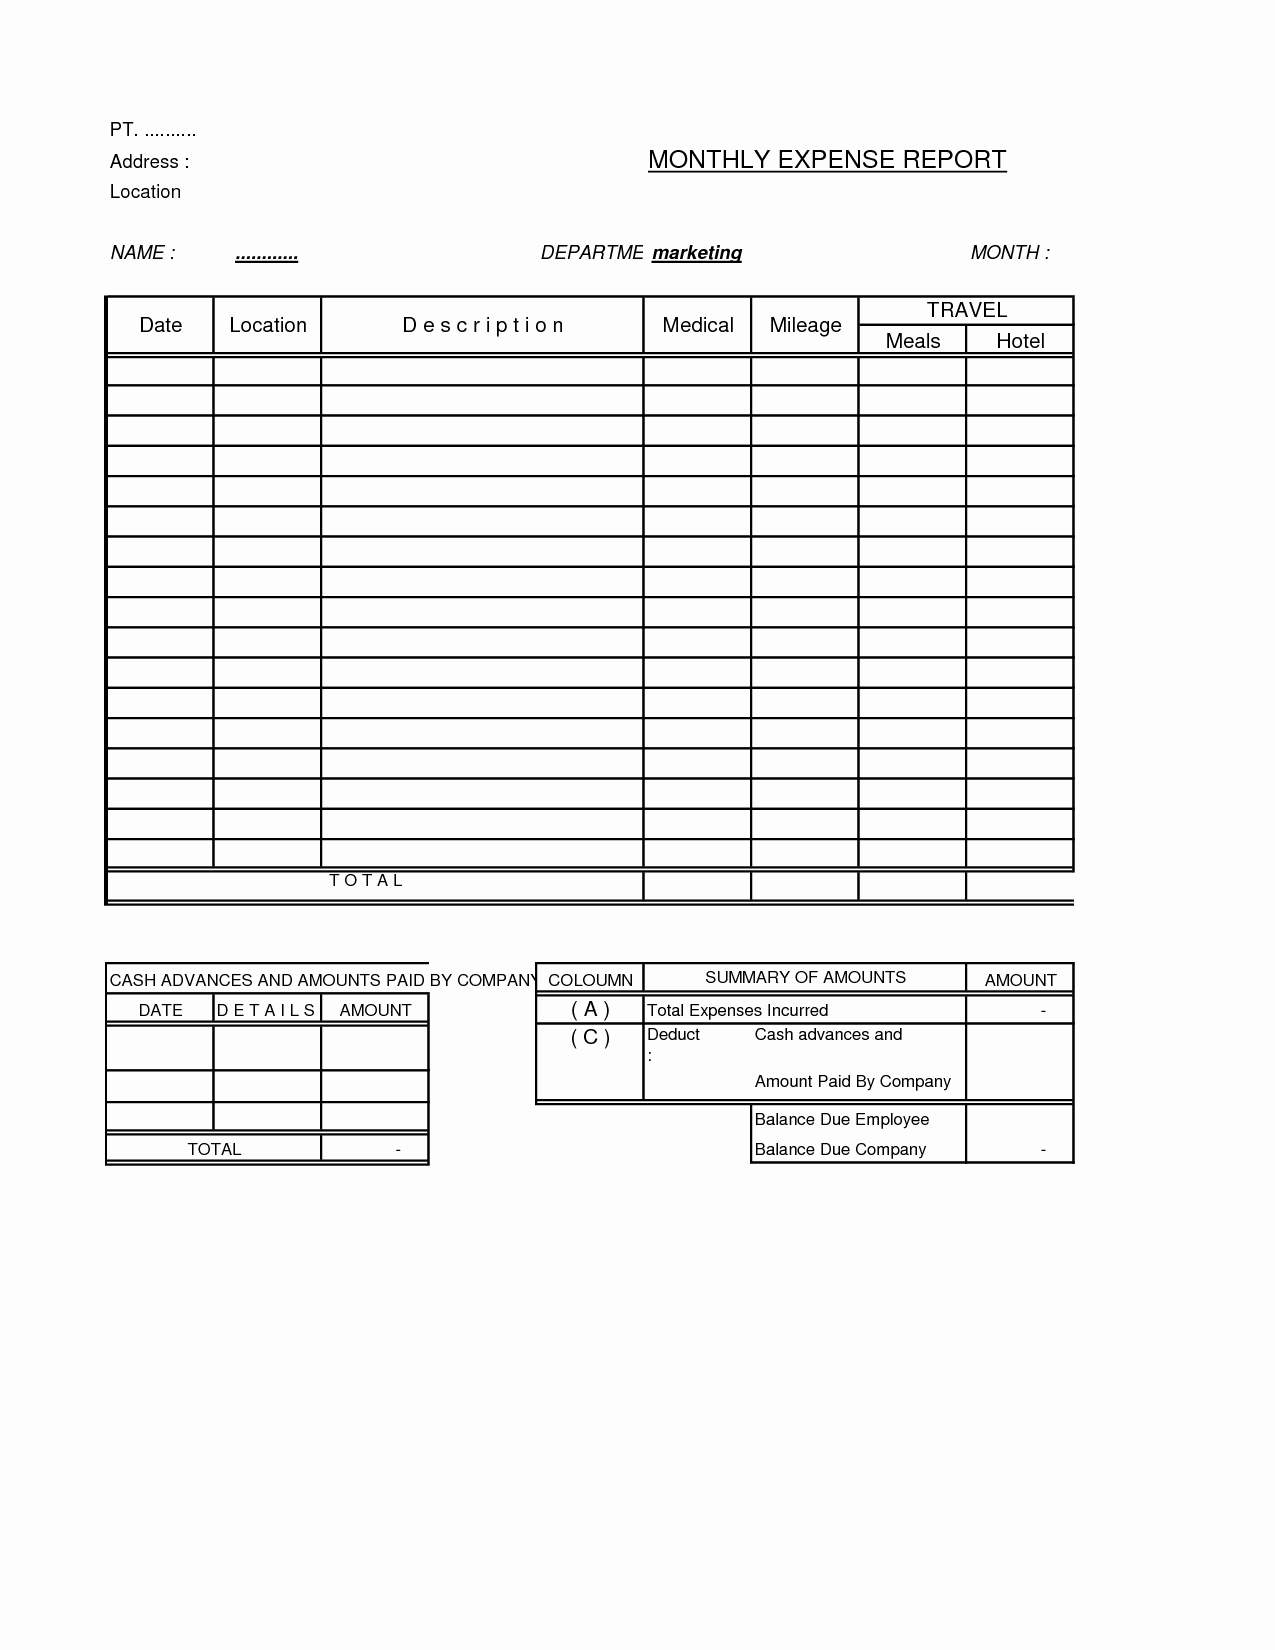 Monthly Expense Report Template Inspirational Free Expense Report form Sample to Track Pany Expenses